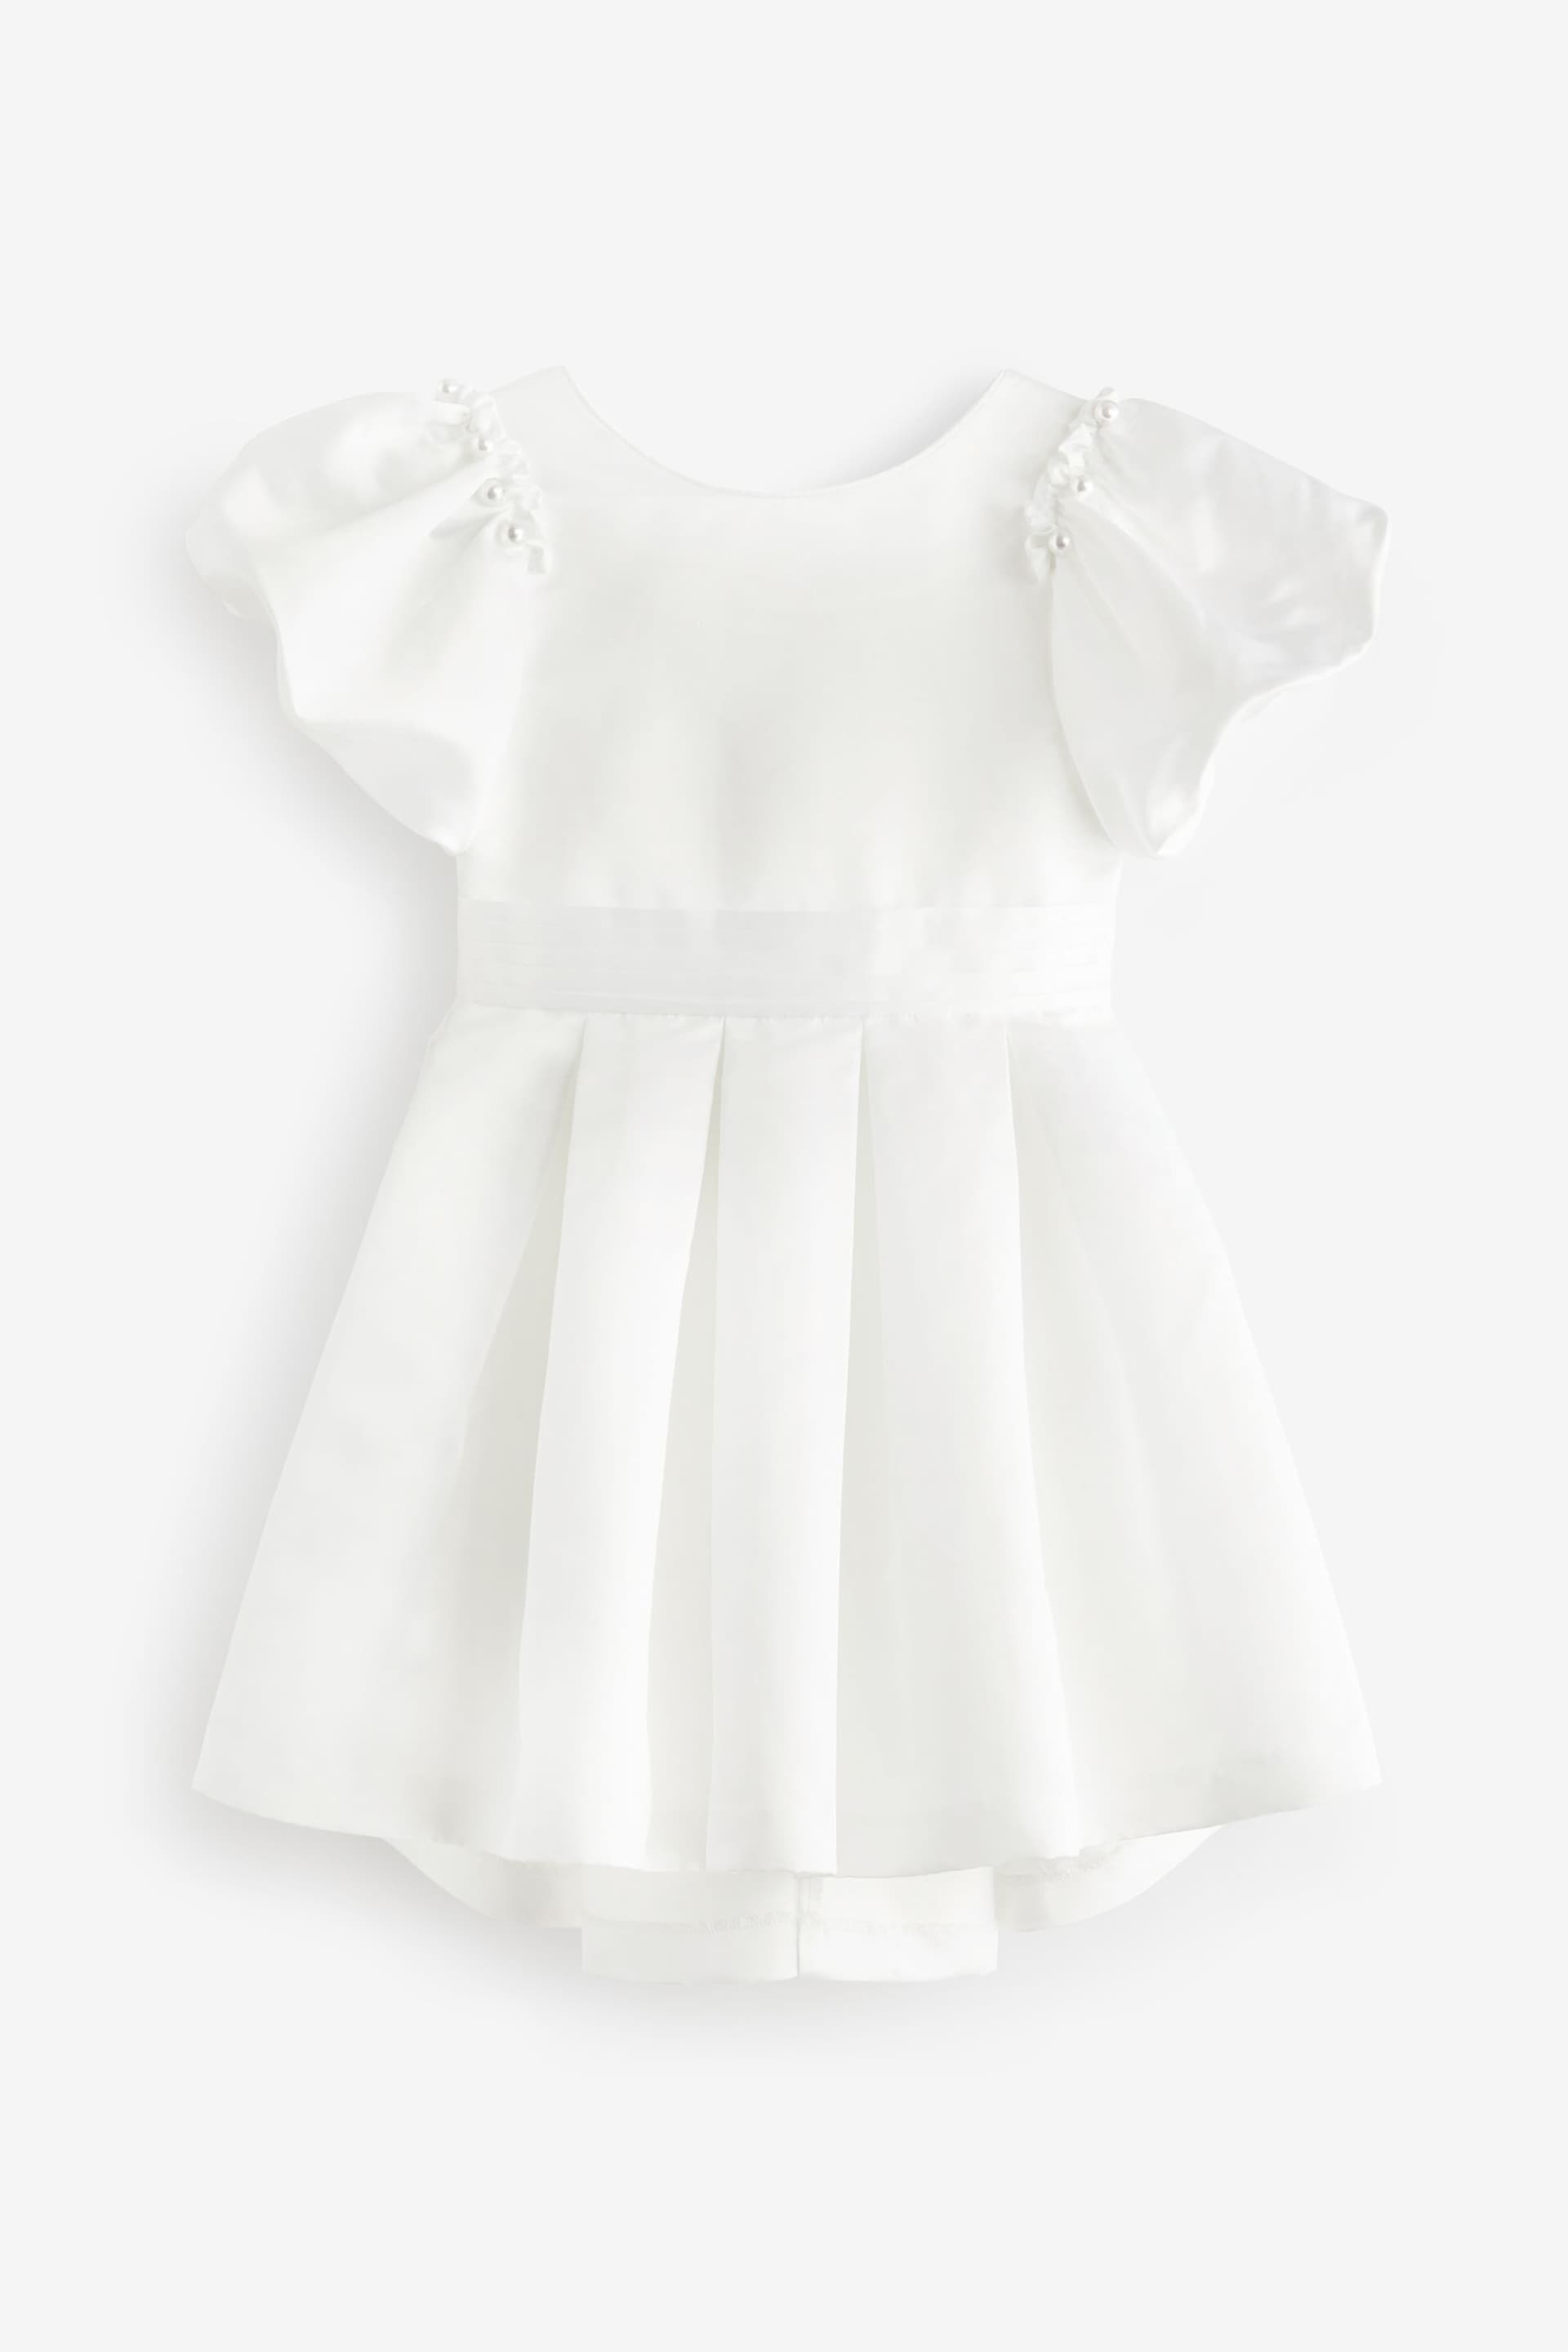 Baker by Ted Baker Pearl Occasion Dress - Image 8 of 11